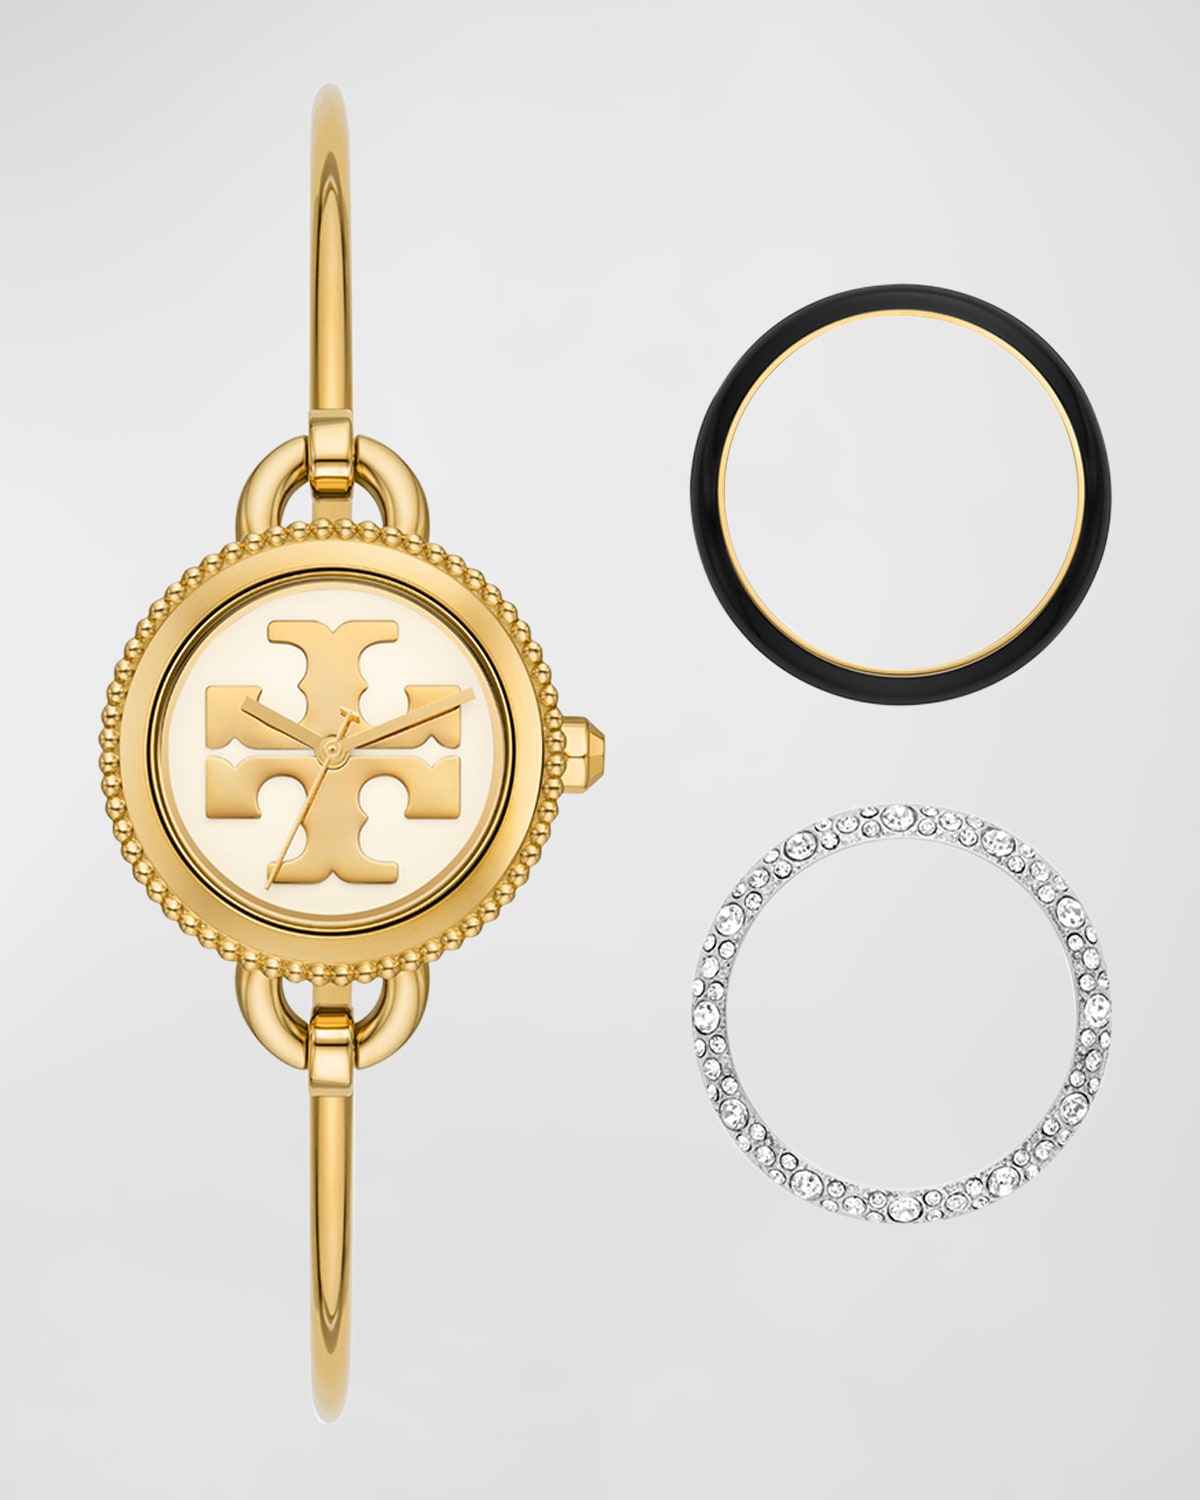 TORY BURCH THE MILLER GOLD TONE STAINLESS STEEL WATCH AND INTERCHANGEABLE TOPRING SET